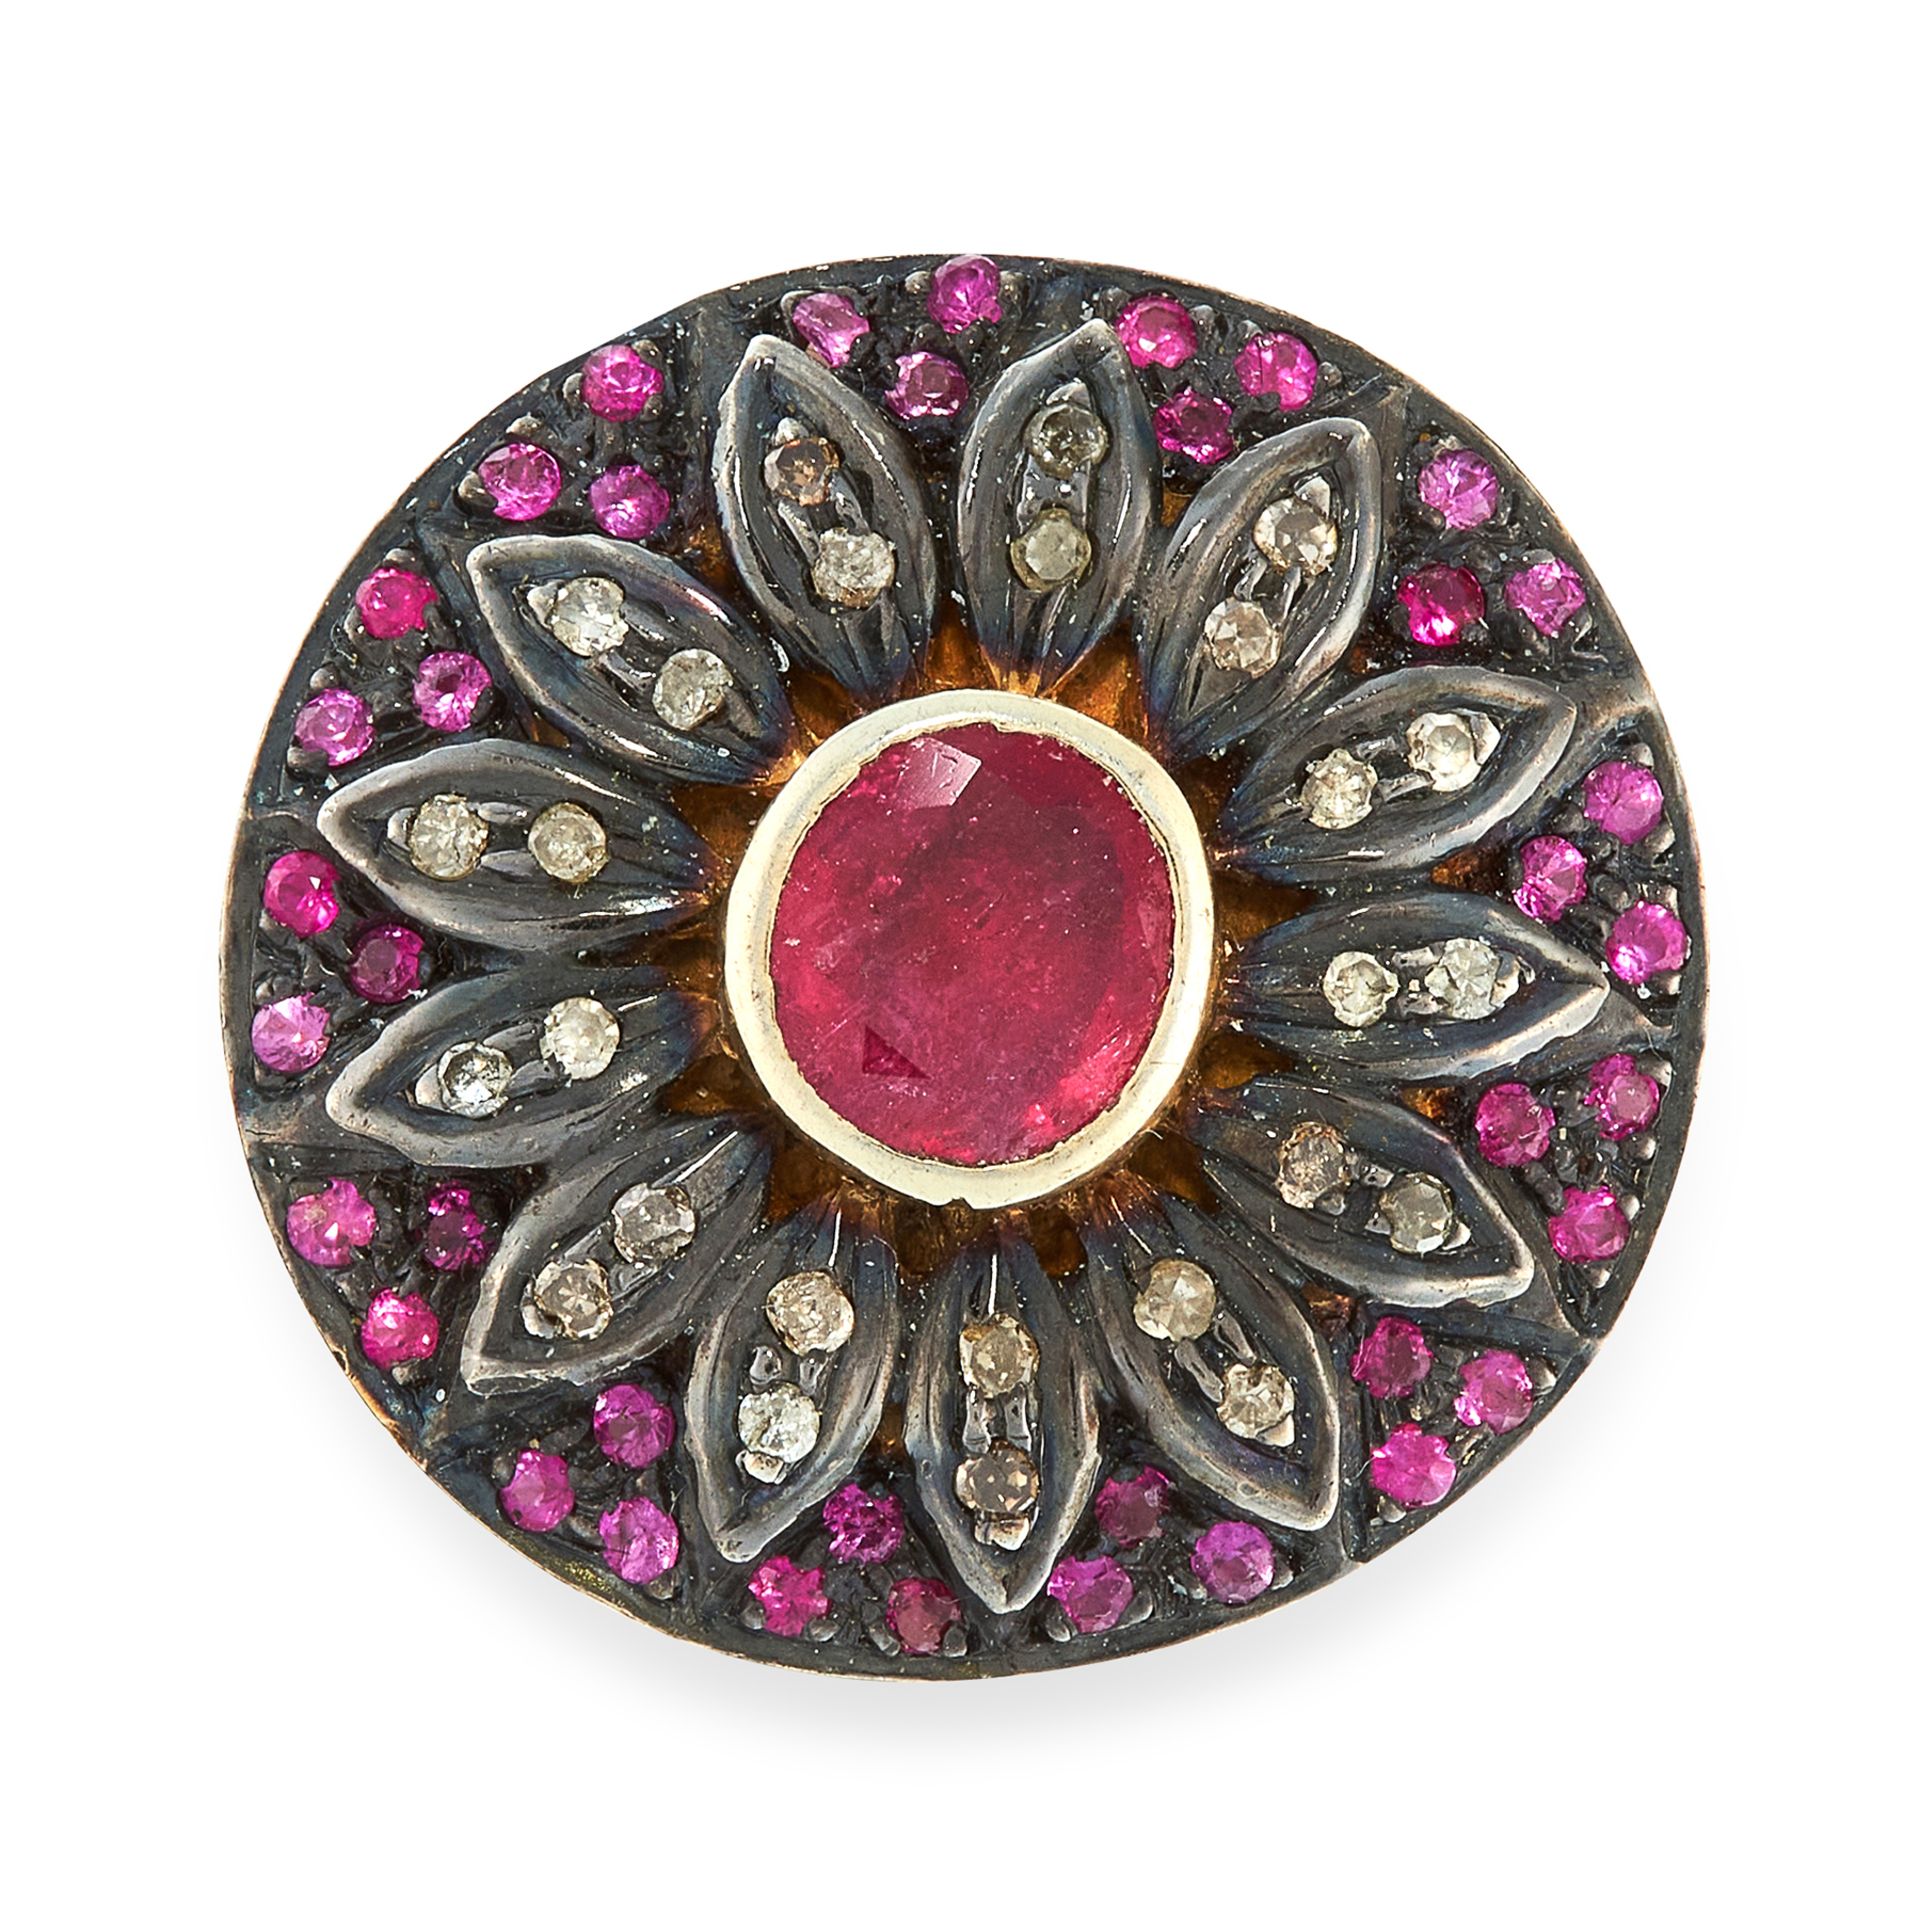 A RUBY AND DIAMOND JEWEL the circular body designed as a flower, set with rubies and diamonds,